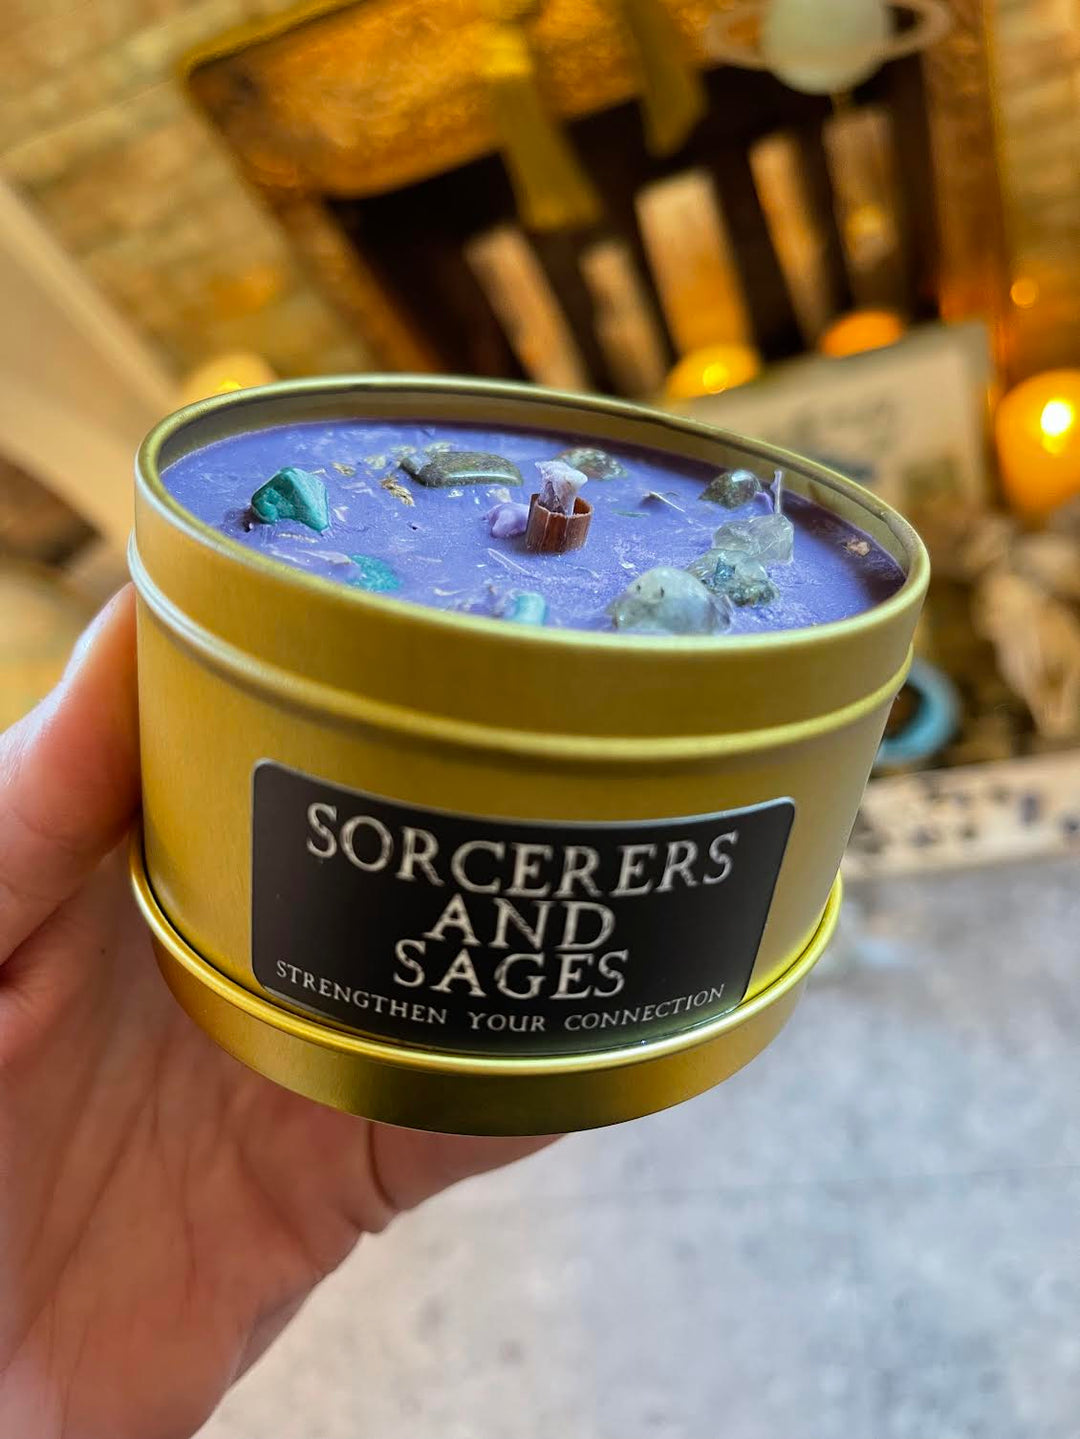 this is the side of the Sorcerers and Sages candle 